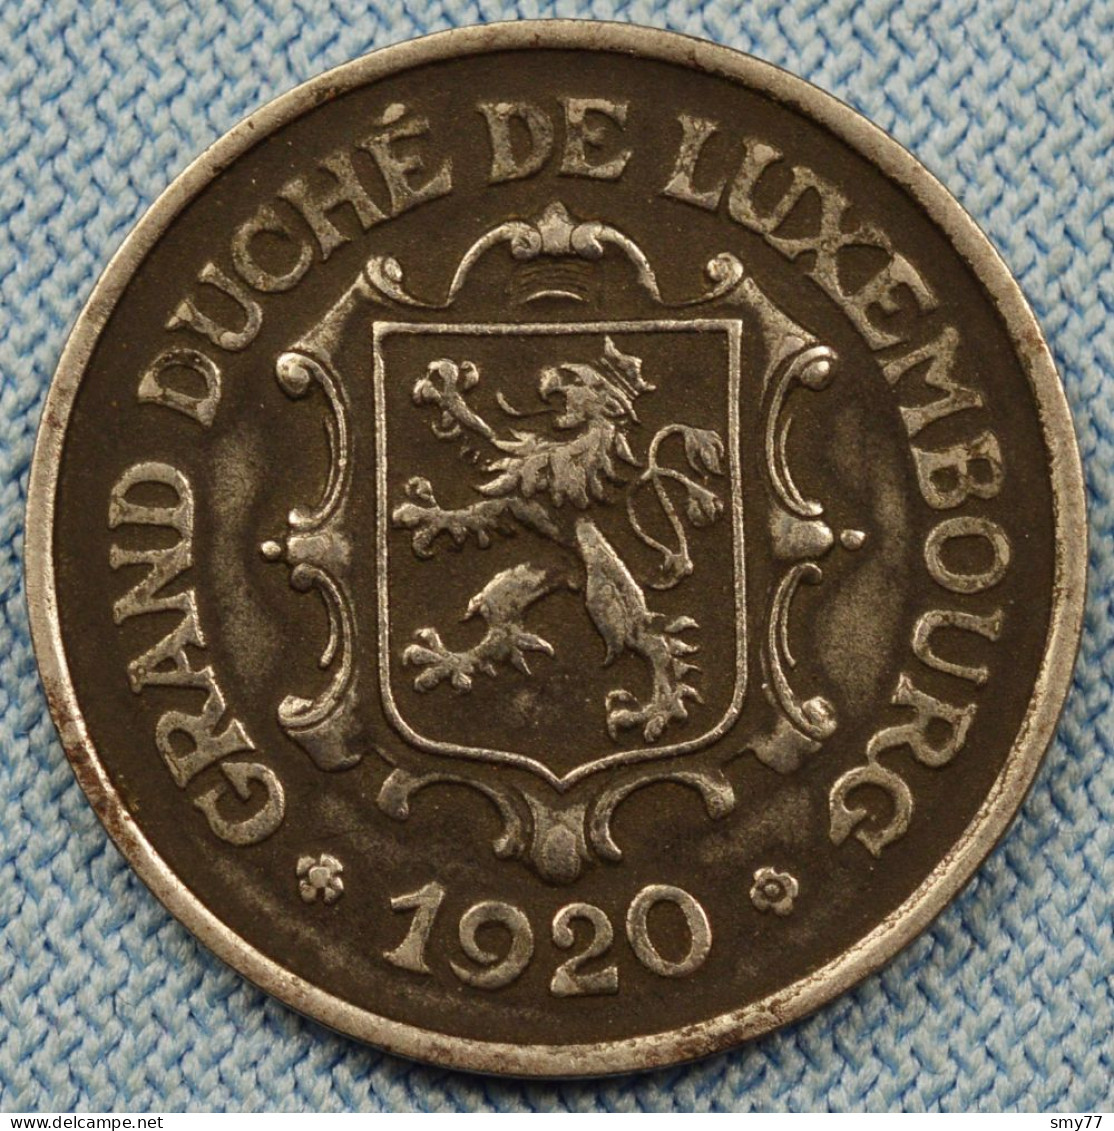 Luxembourg • 25 Centimes 1920 • Charlotte •  Luxemburg / Fer / Iron •  [24-690] - Luxembourg